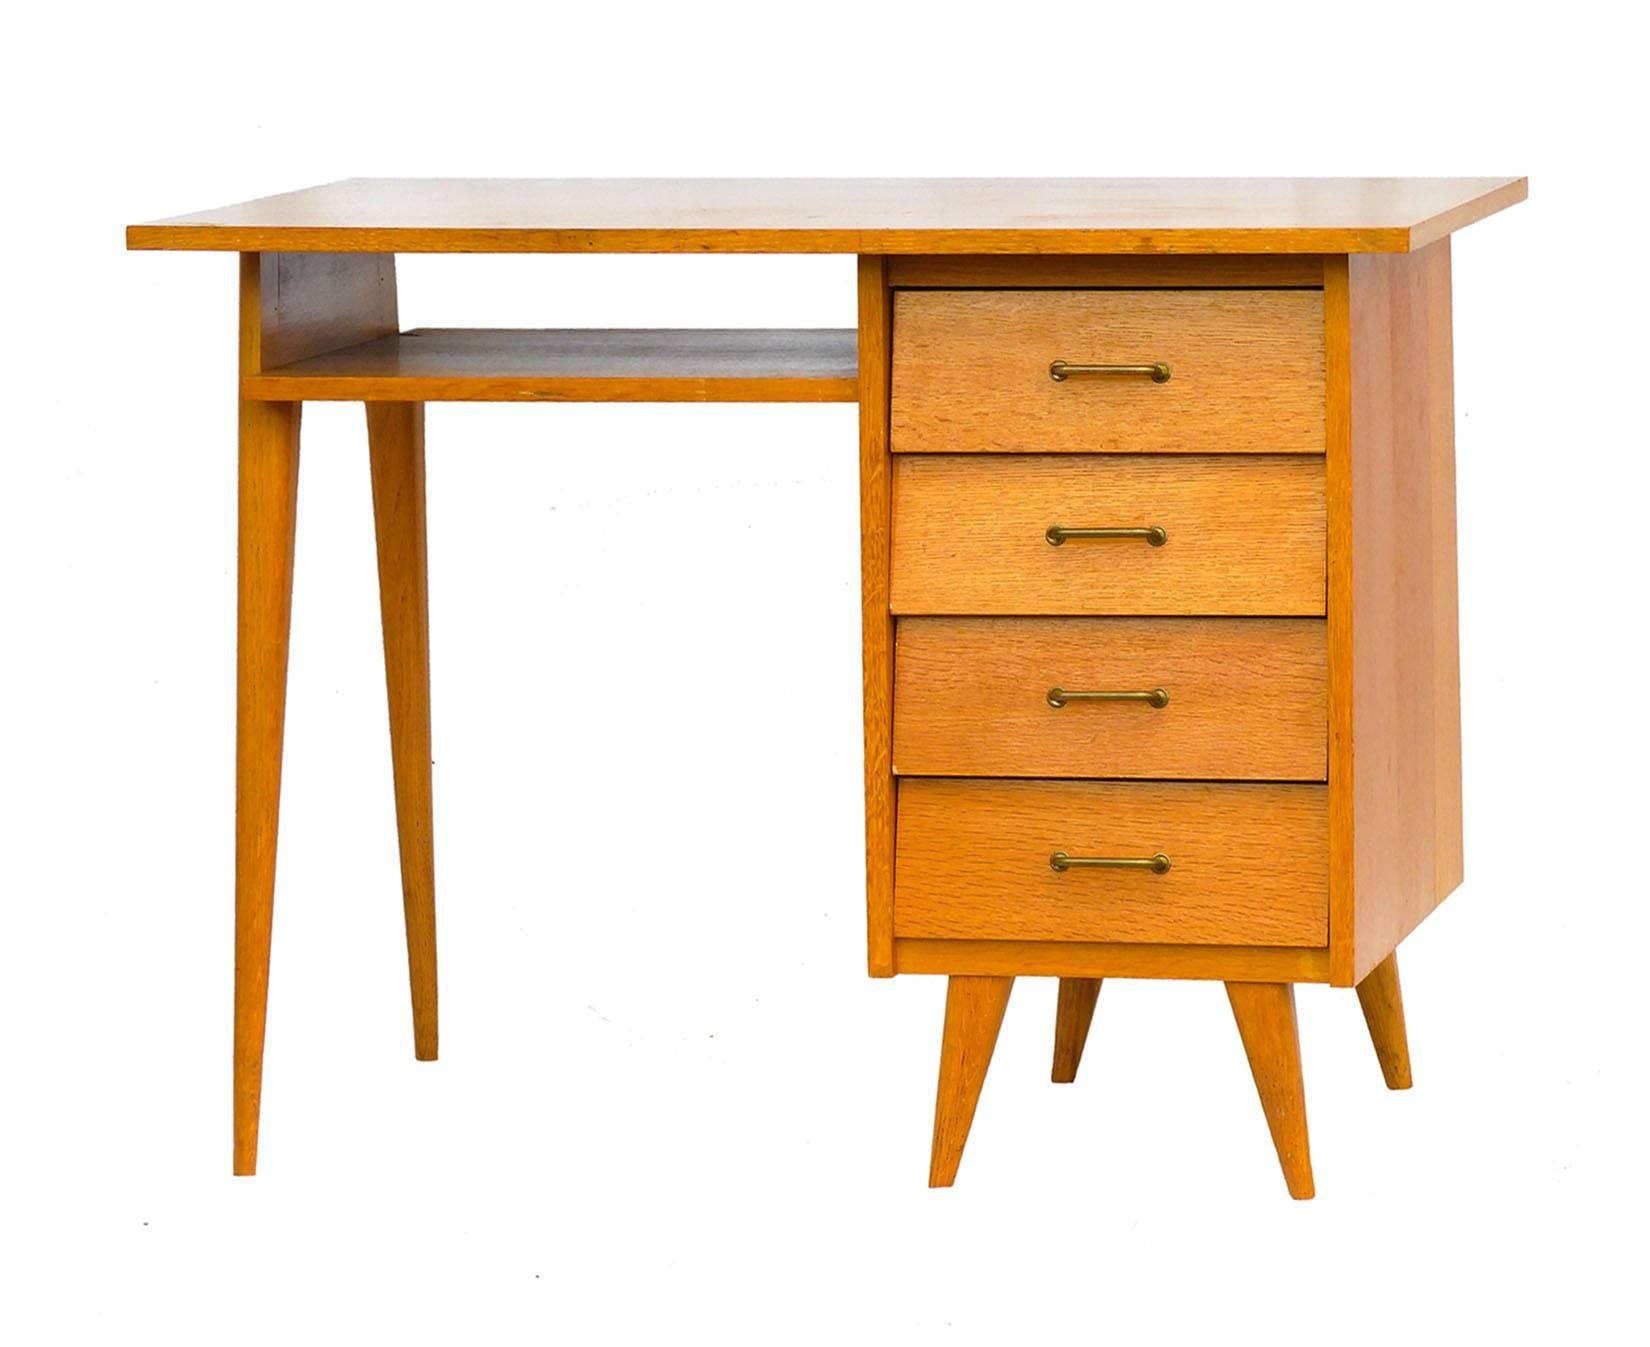 French Mid-Century Modern desk writing table, French, circa 1960
Good vintage desk with four drawers and a under shelf in beech.
In good vintage condition for its age only minor signs of use
We offer a global parcel and a door to door freight